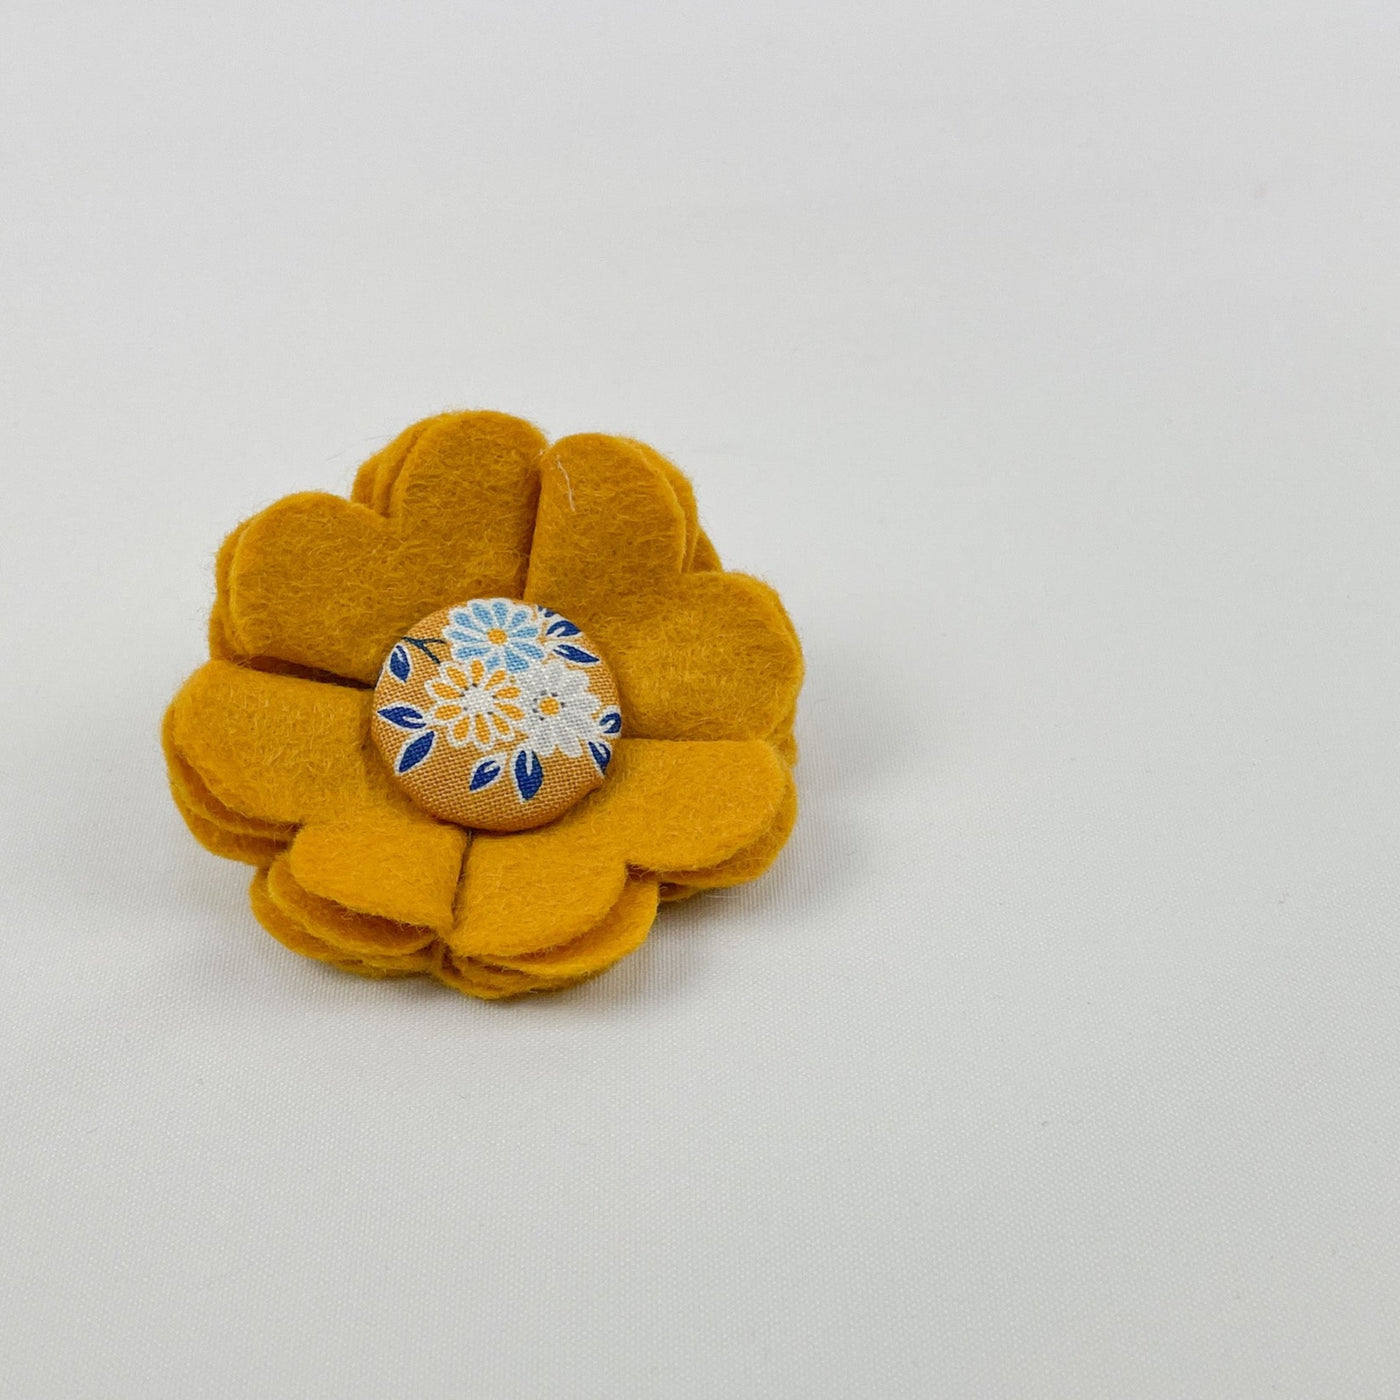 Cat Collar Flower Accessory in Yellow with Liberty Fabric Button